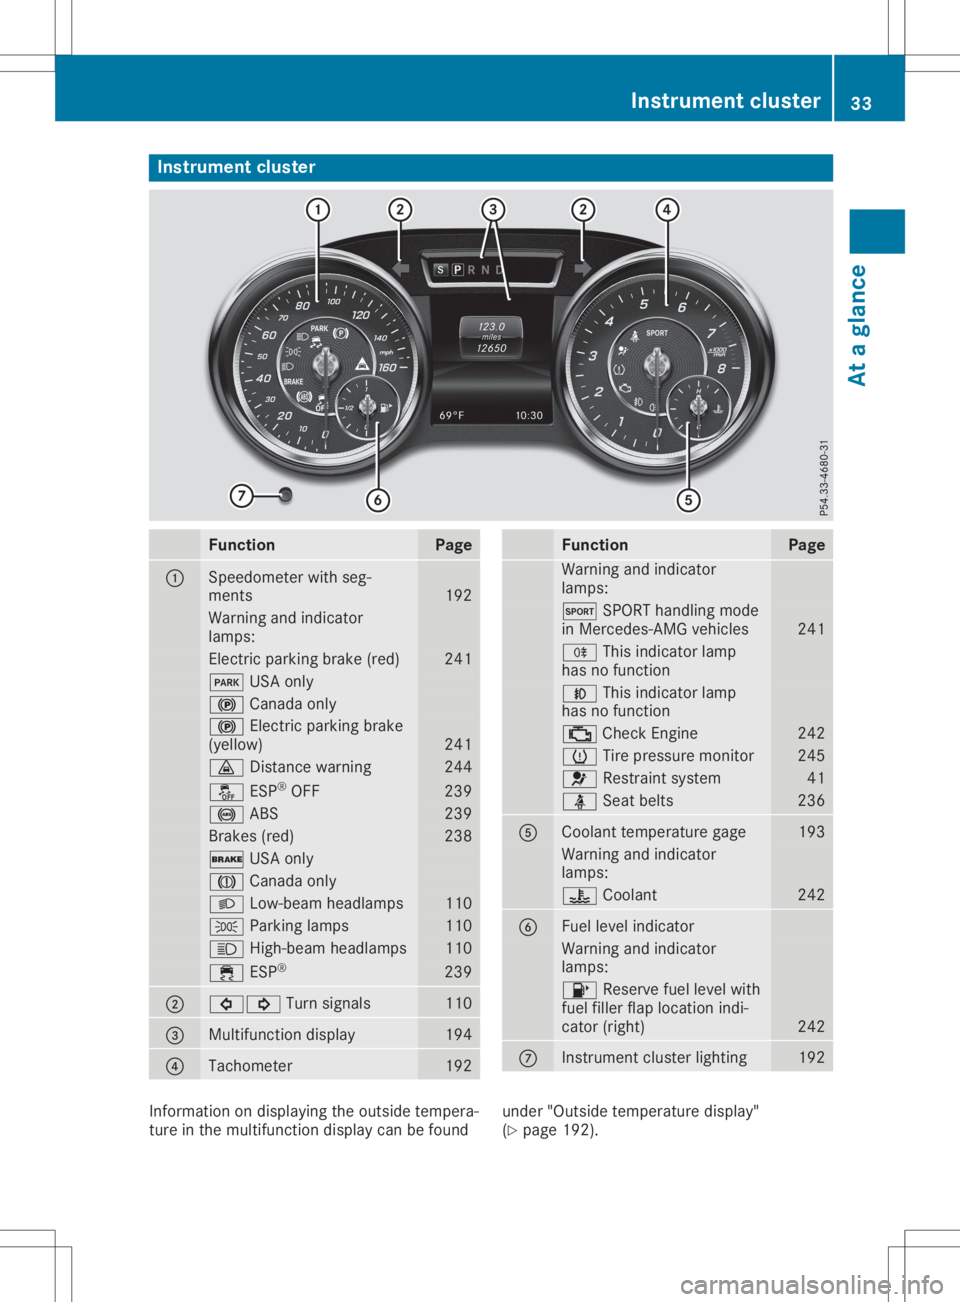 MERCEDES-BENZ SL CLASS 2020  Owners Manual Inst
rumen tclus ter Funct
ion Pag
e 0043
Sp
eedo meterwit hseg -
men ts 19
2 Warn
ingand indicat or
lamp s: El
ec tric park ingbrak e(re d) 24
1 0049
USAon ly 0024
Canad aon ly 0024
Elec tric park in